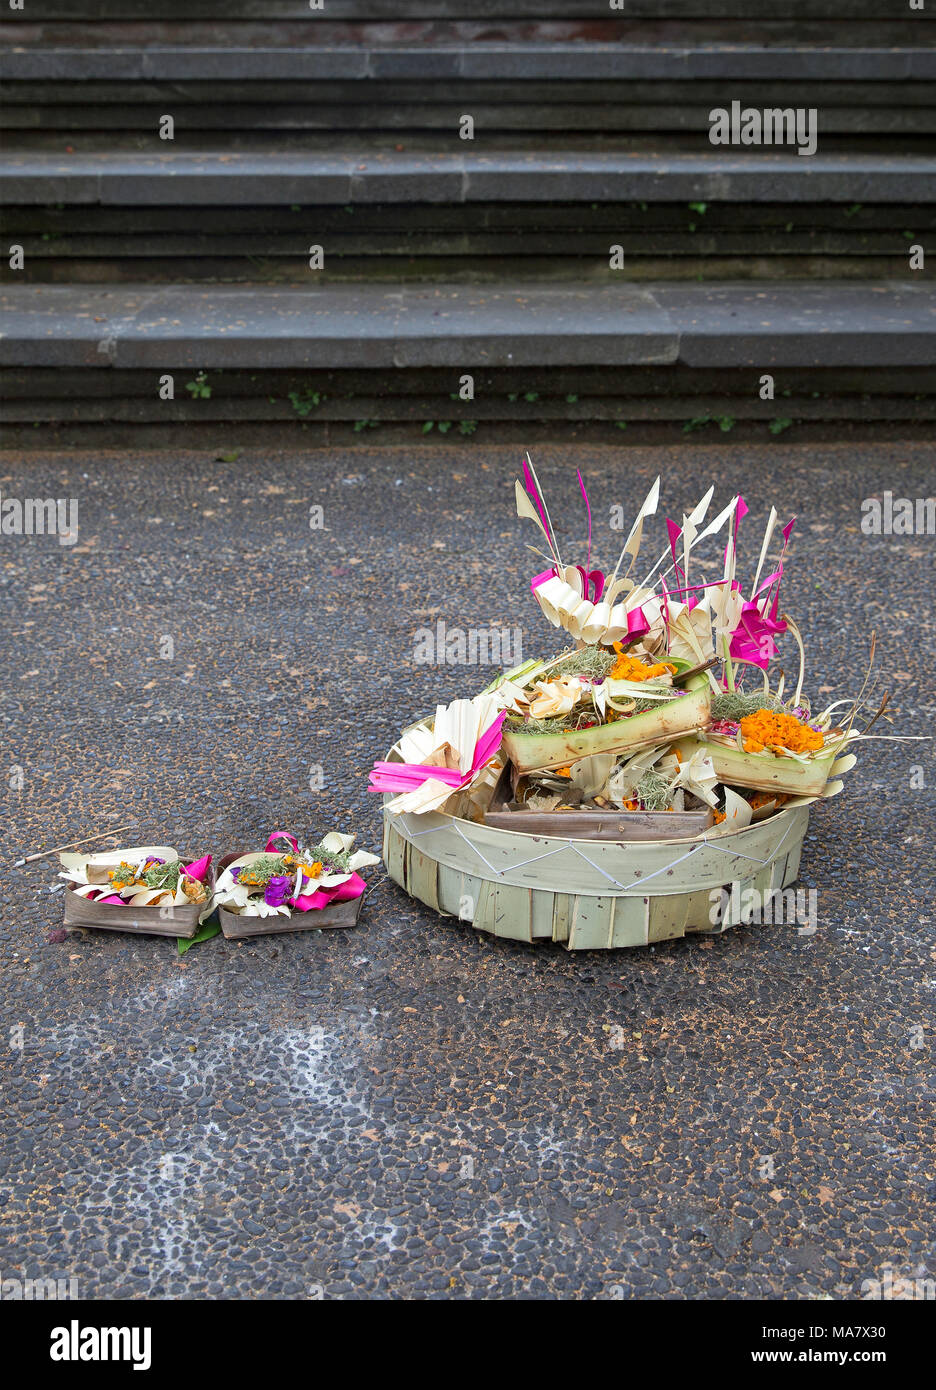 Little basket with offerings for the gods, Indonesia Stock Photo